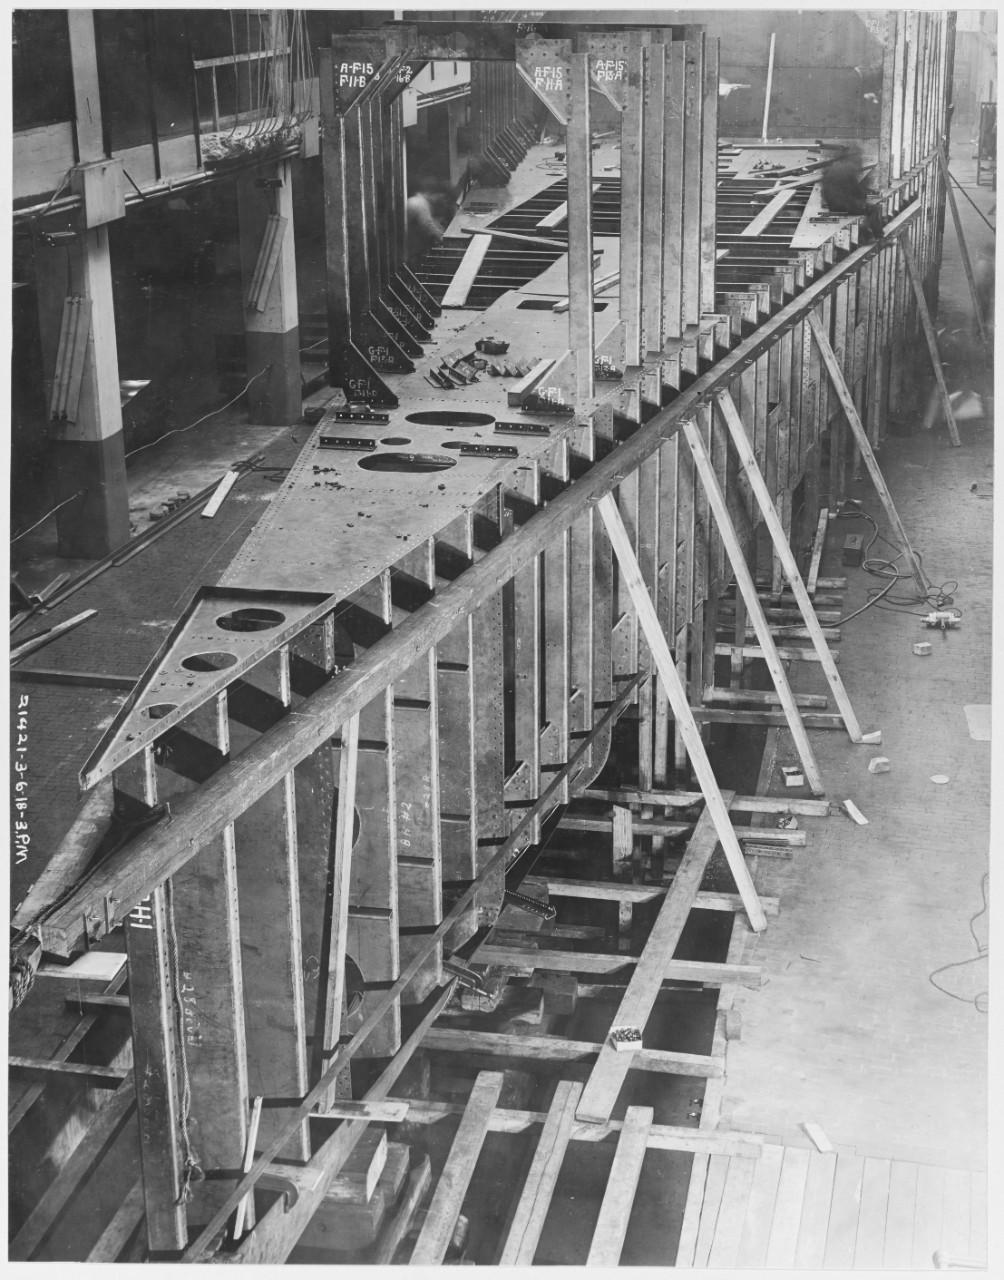 Construction of Ford Eagle Boats, Ford Motor Company, March 6, 1918